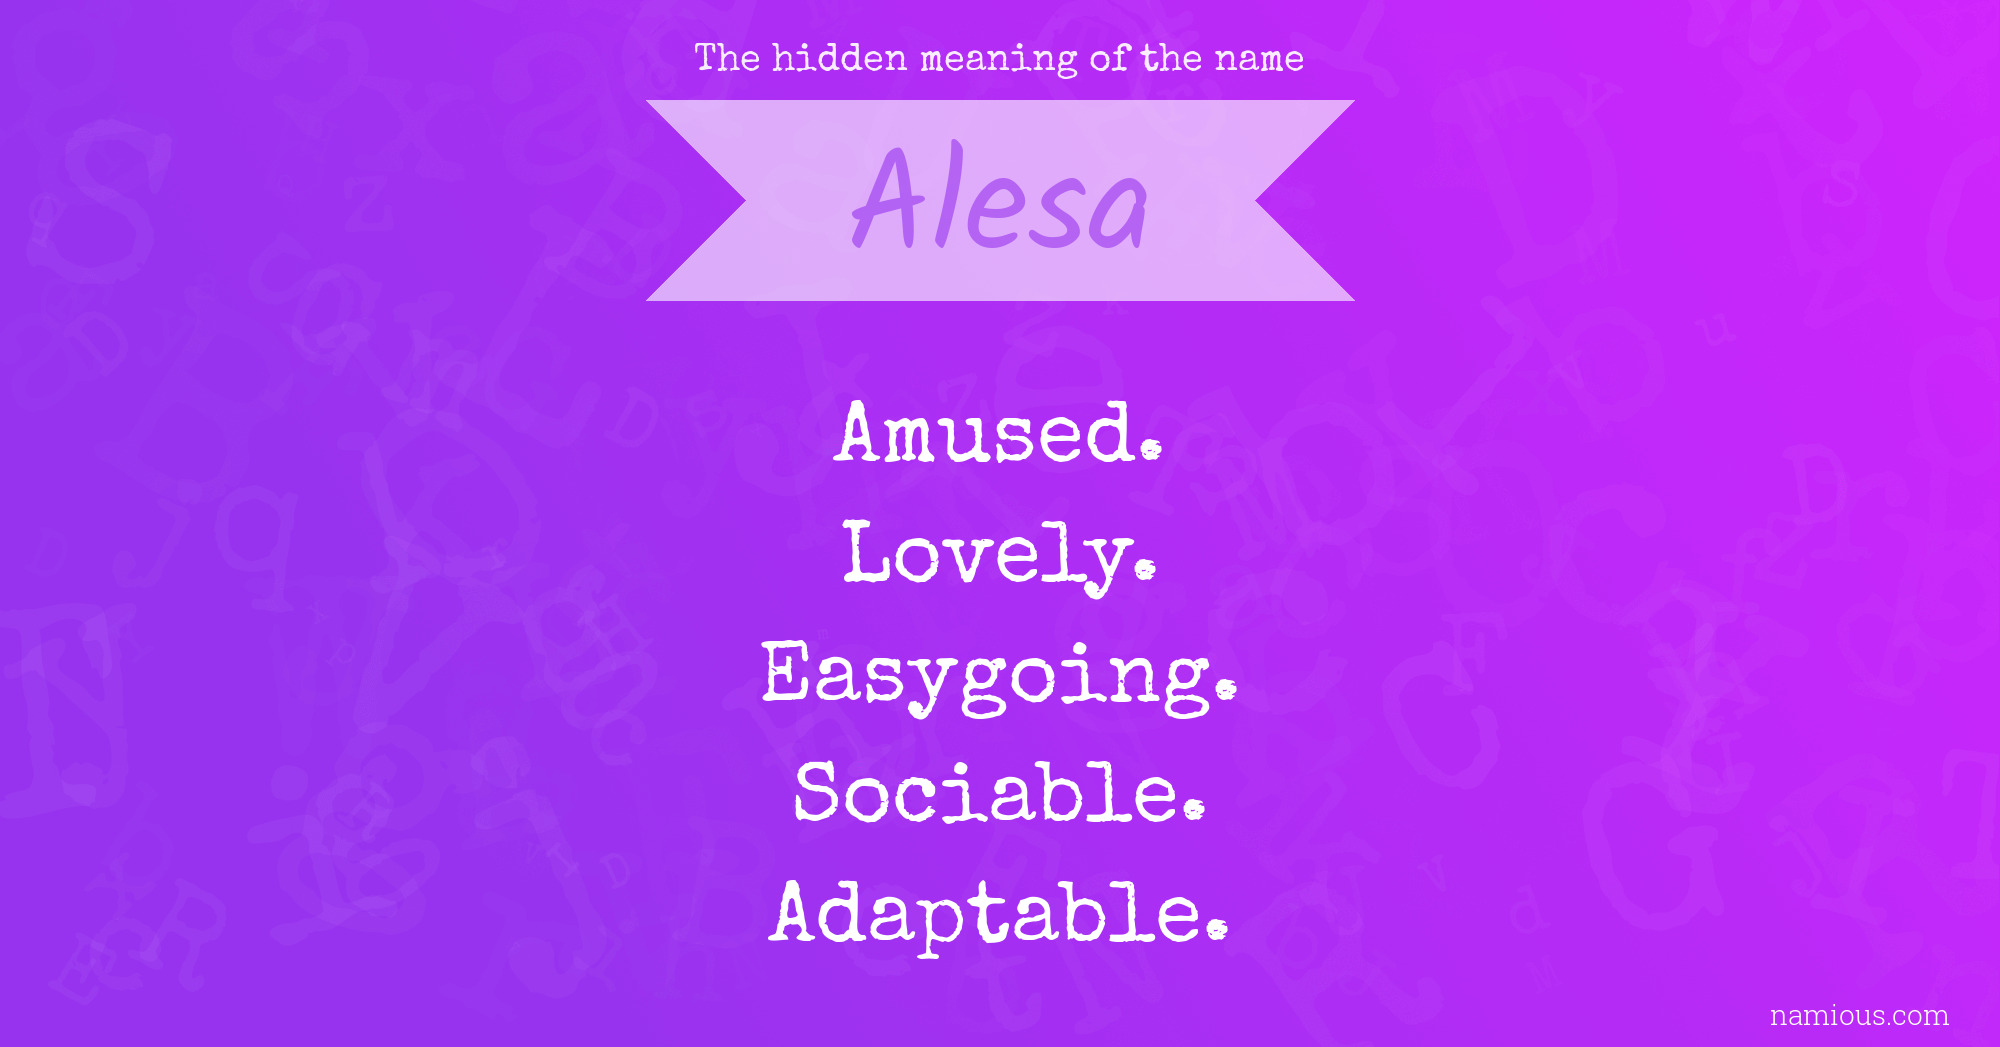 The hidden meaning of the name Alesa